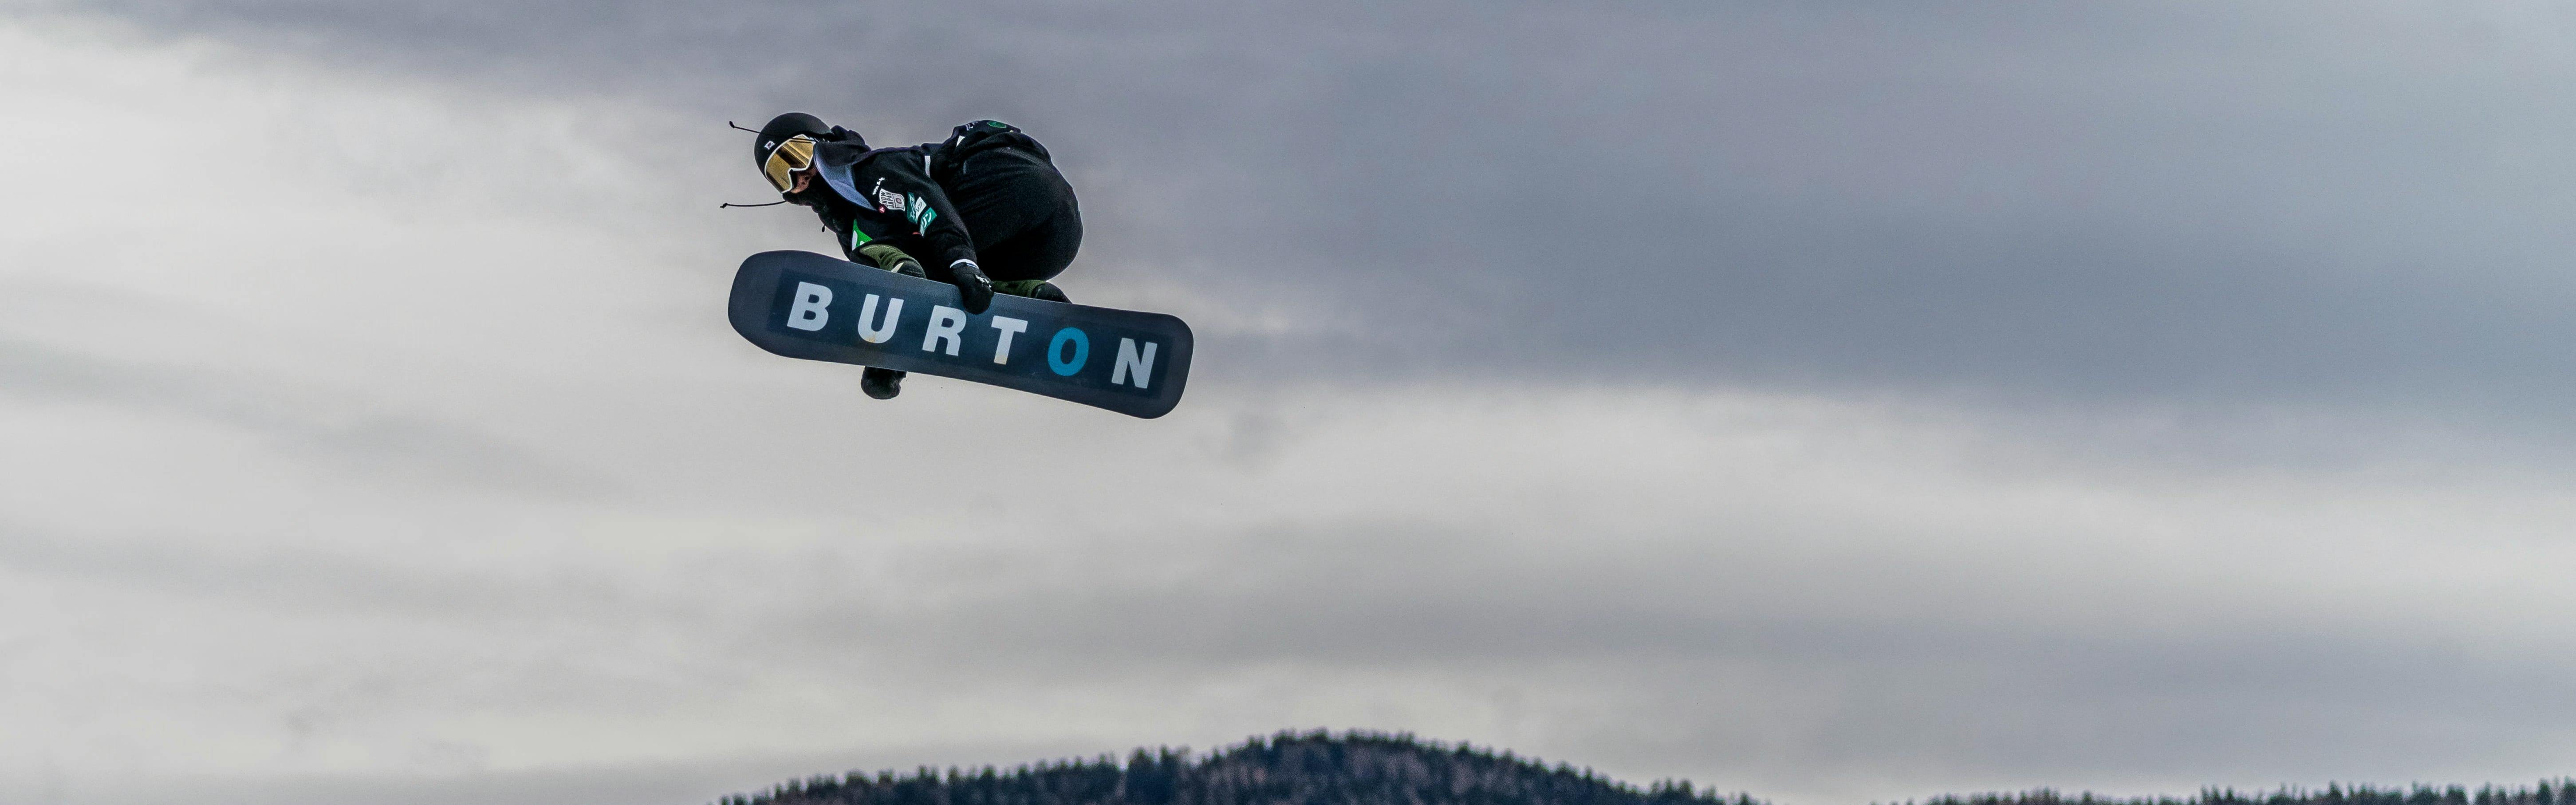 A snowboarder jumping in the air and grabbing his snowboard. The bottom of the snowboard reads "Burton". 